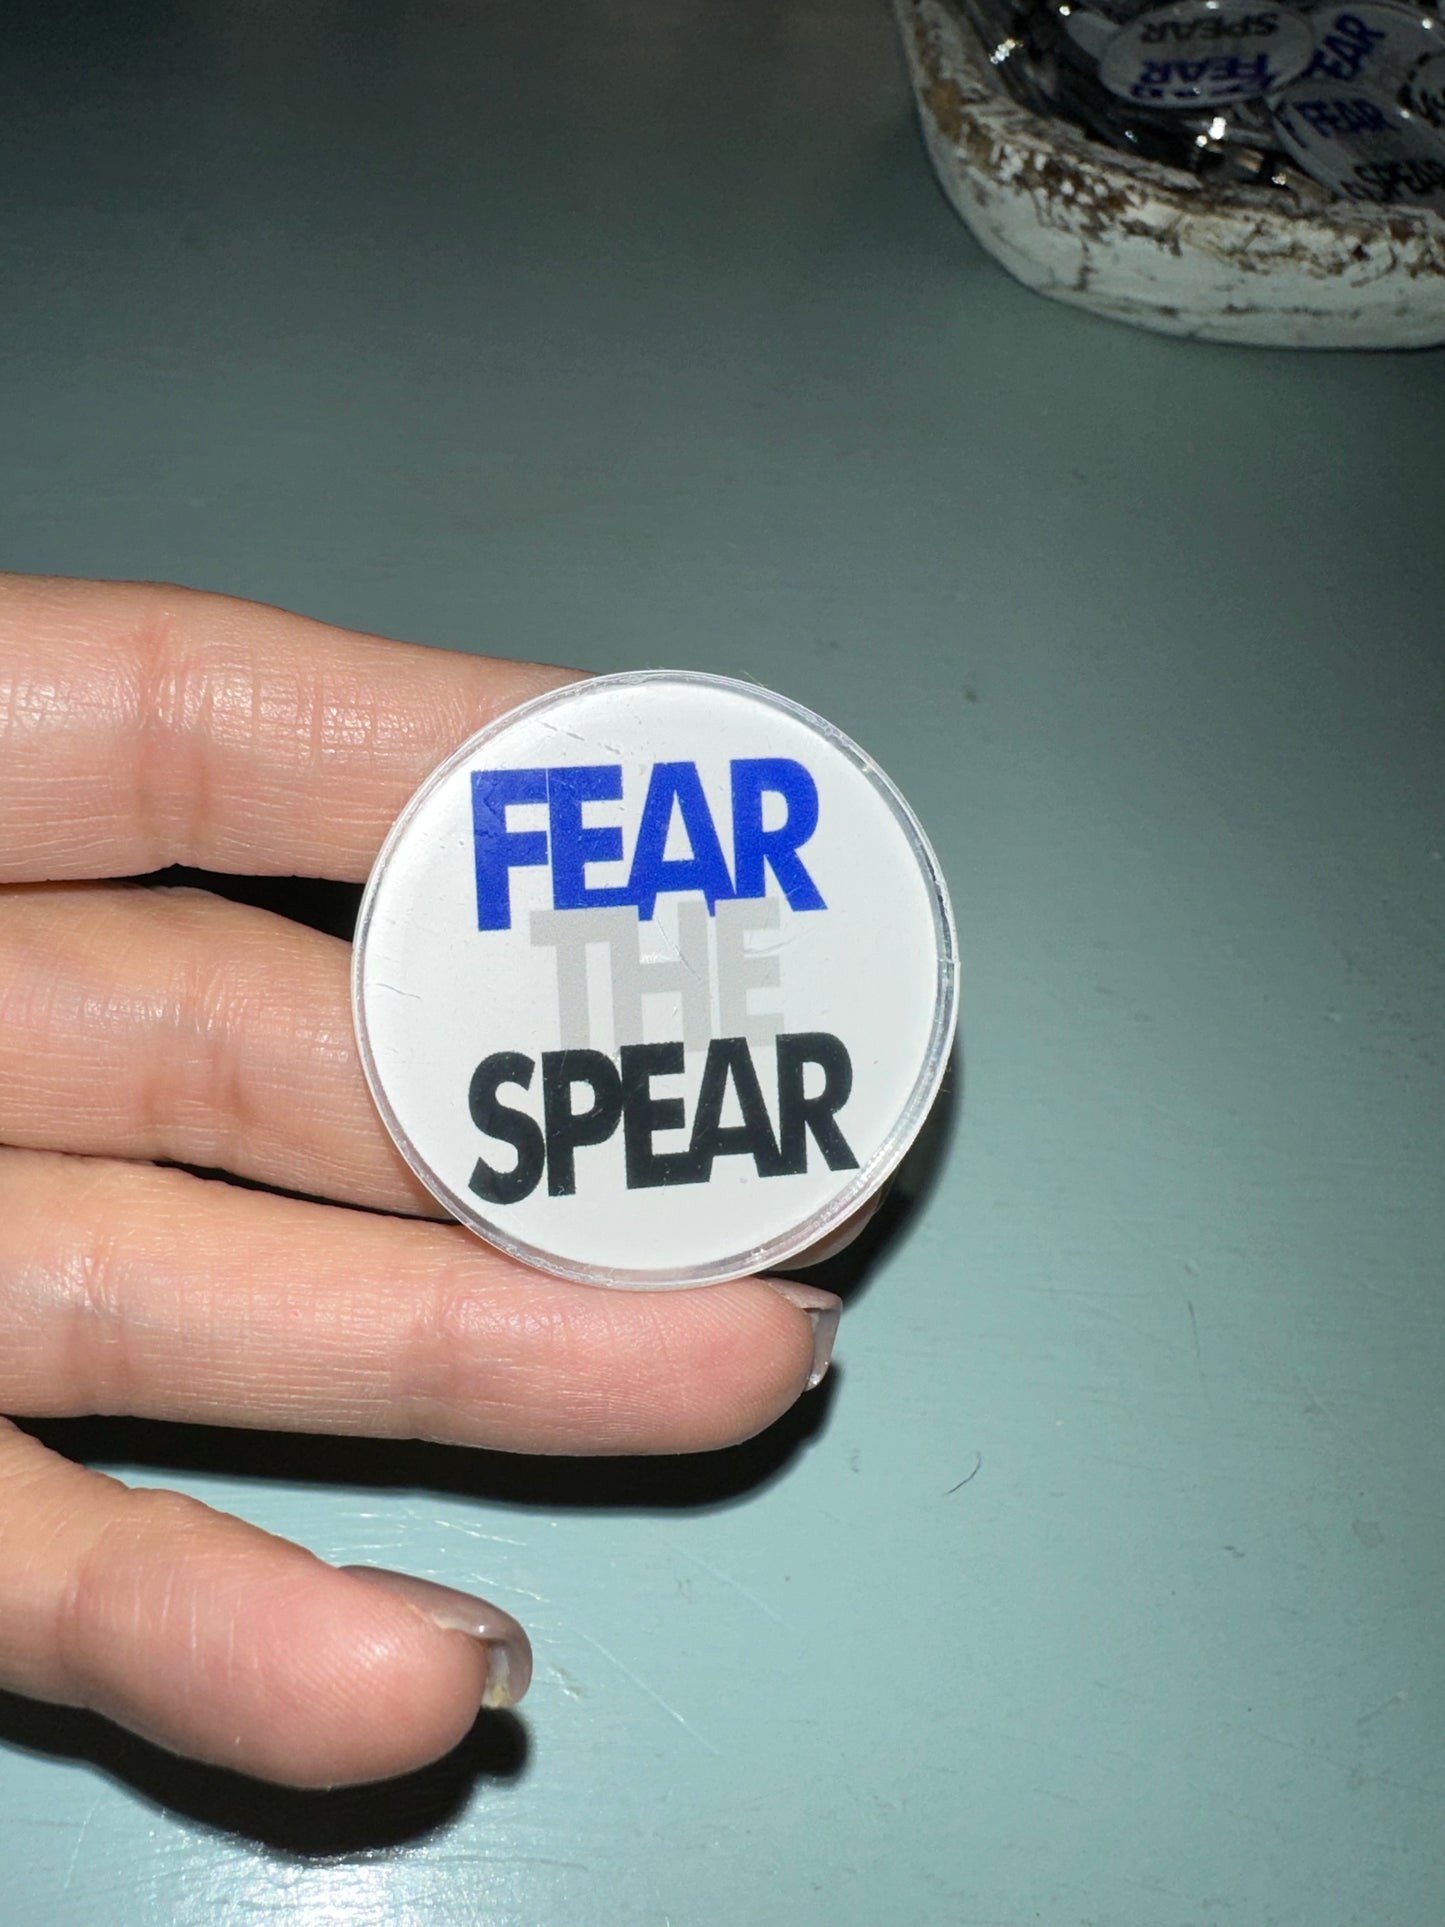 Fear the spear pin